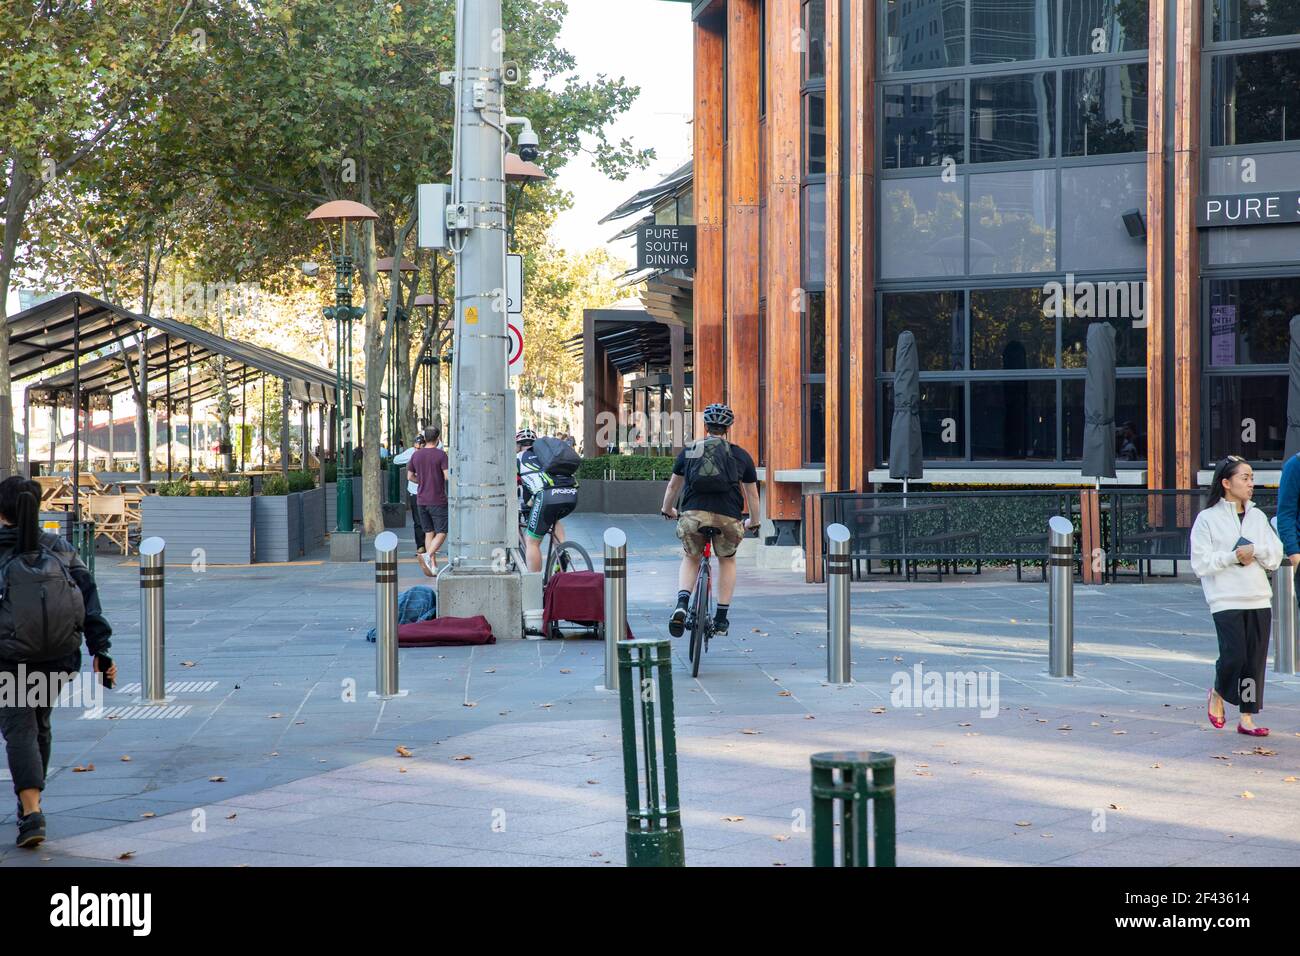 Melbourne southbank cyclists commuting in the pedestrianised area, Melbourne city centre,Victoria,Australia Stock Photo